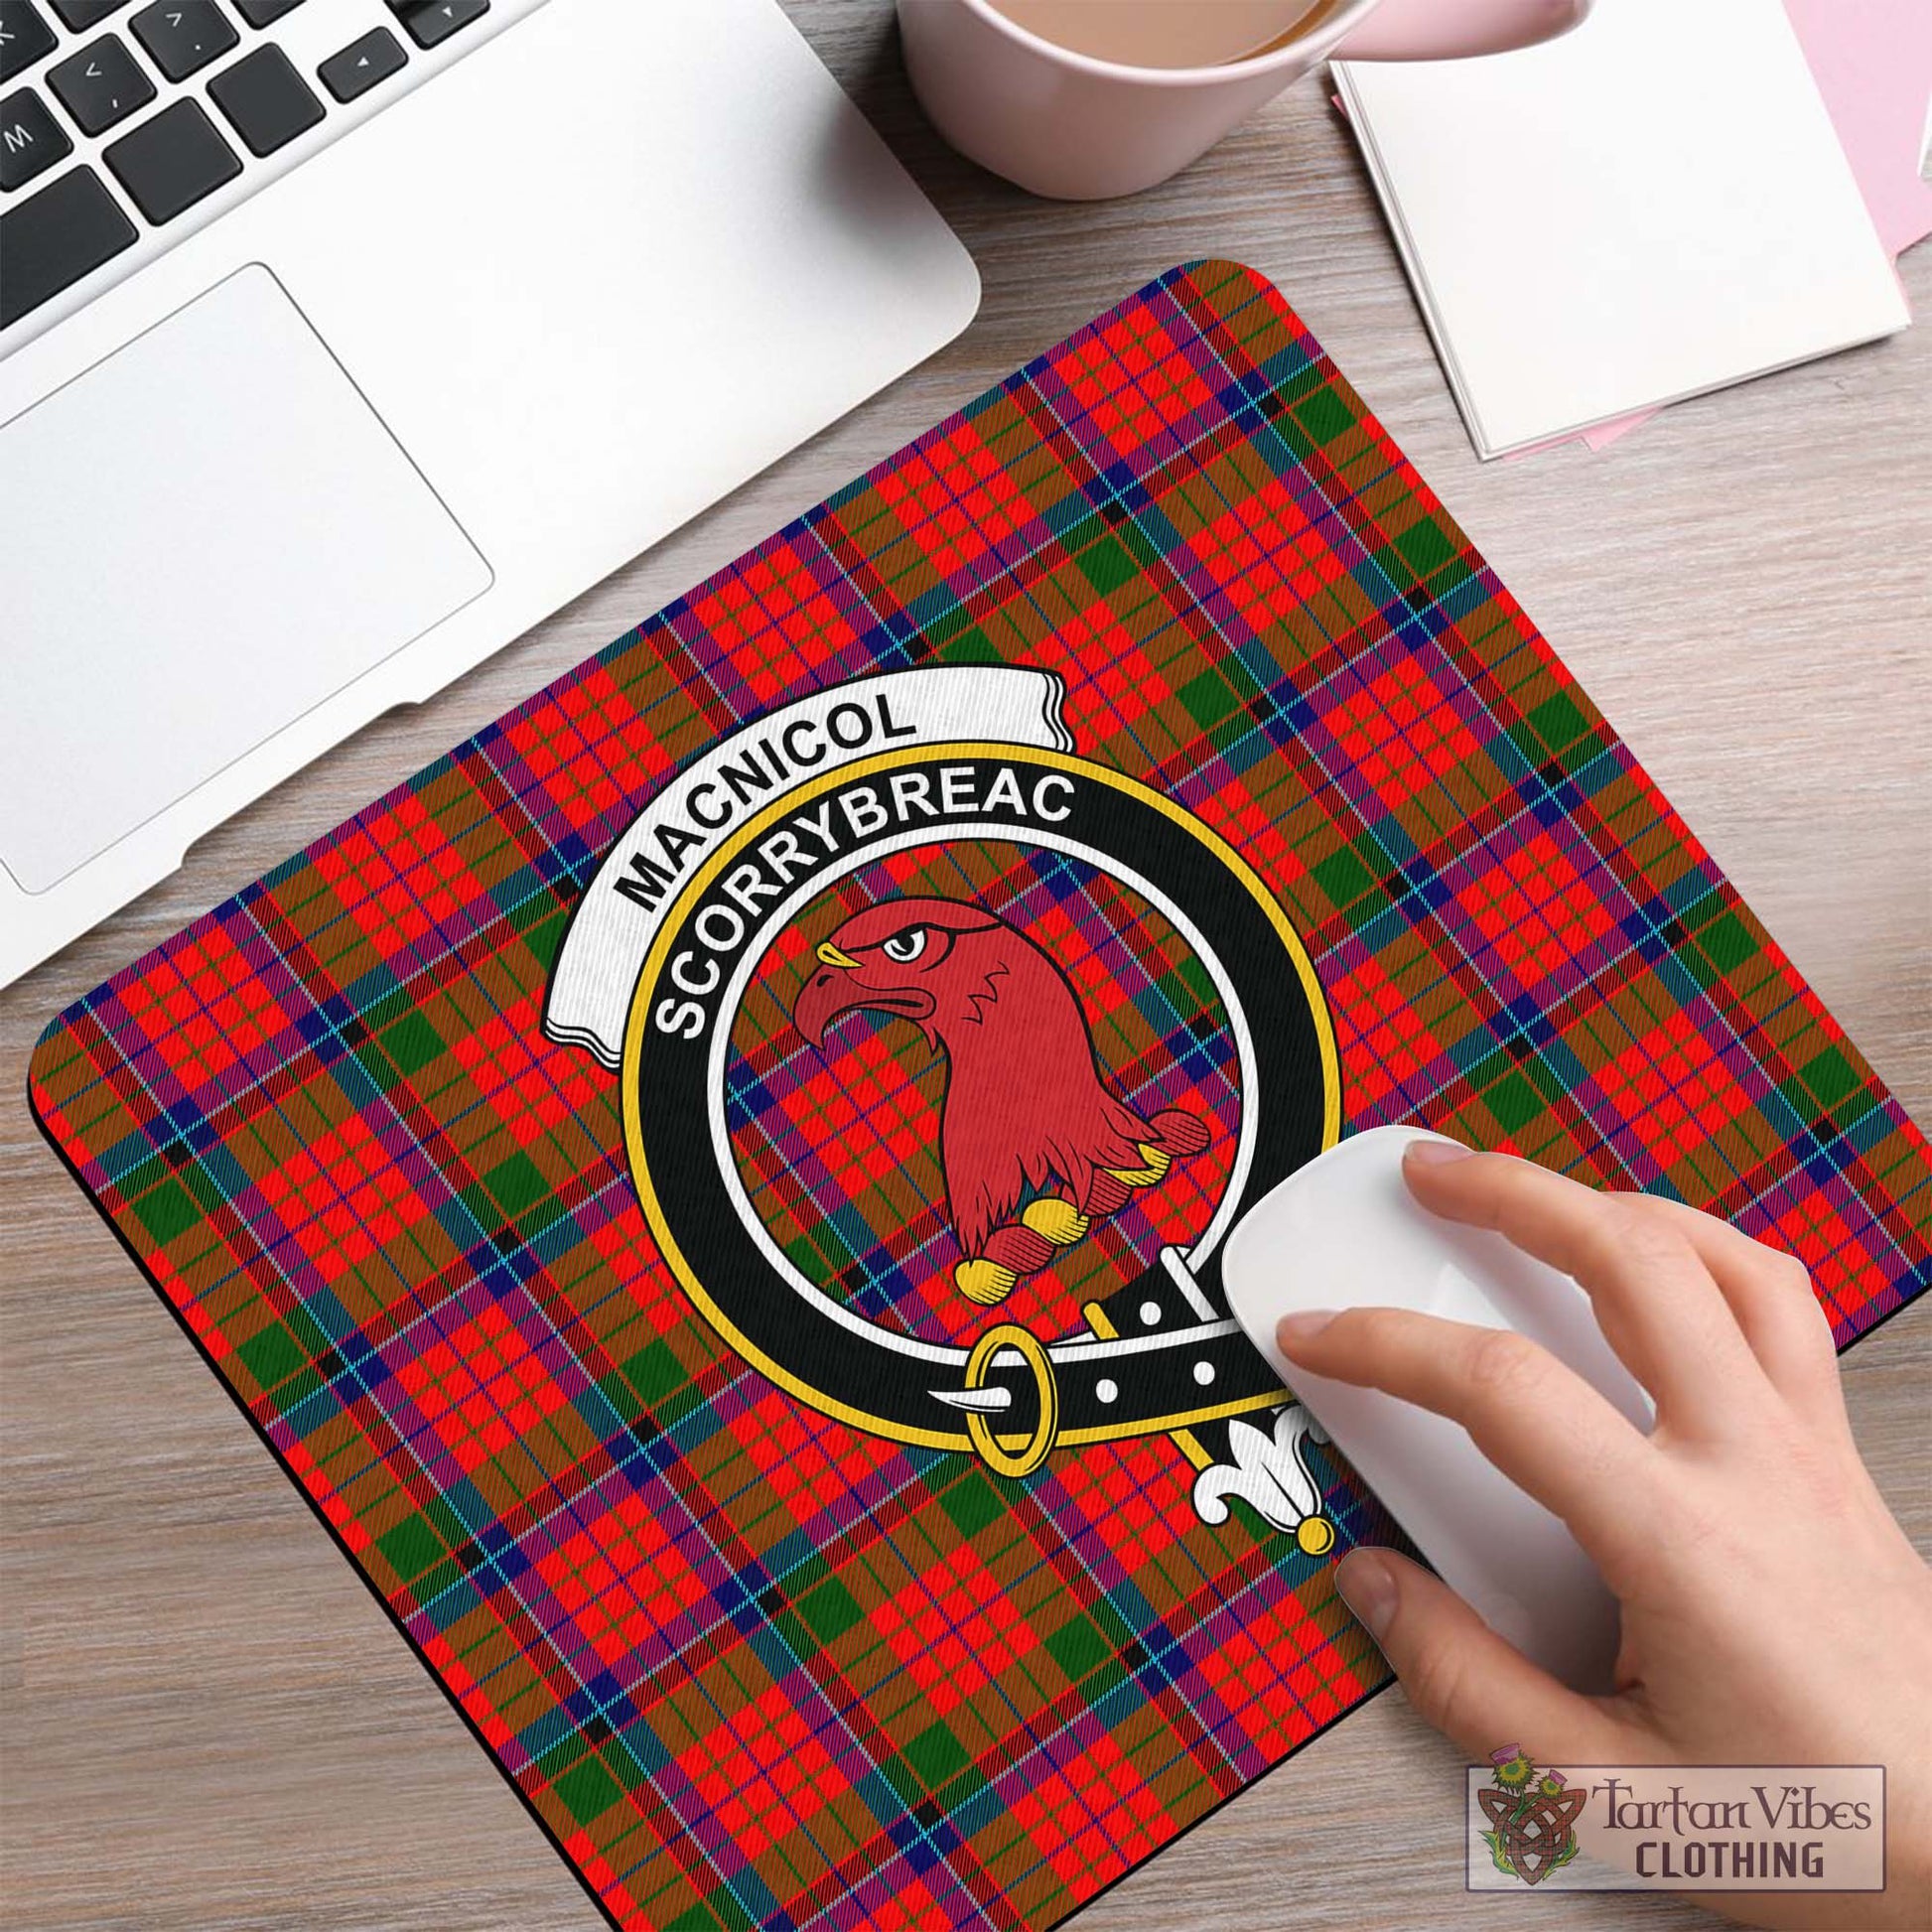 Tartan Vibes Clothing MacNicol of Scorrybreac Tartan Mouse Pad with Family Crest